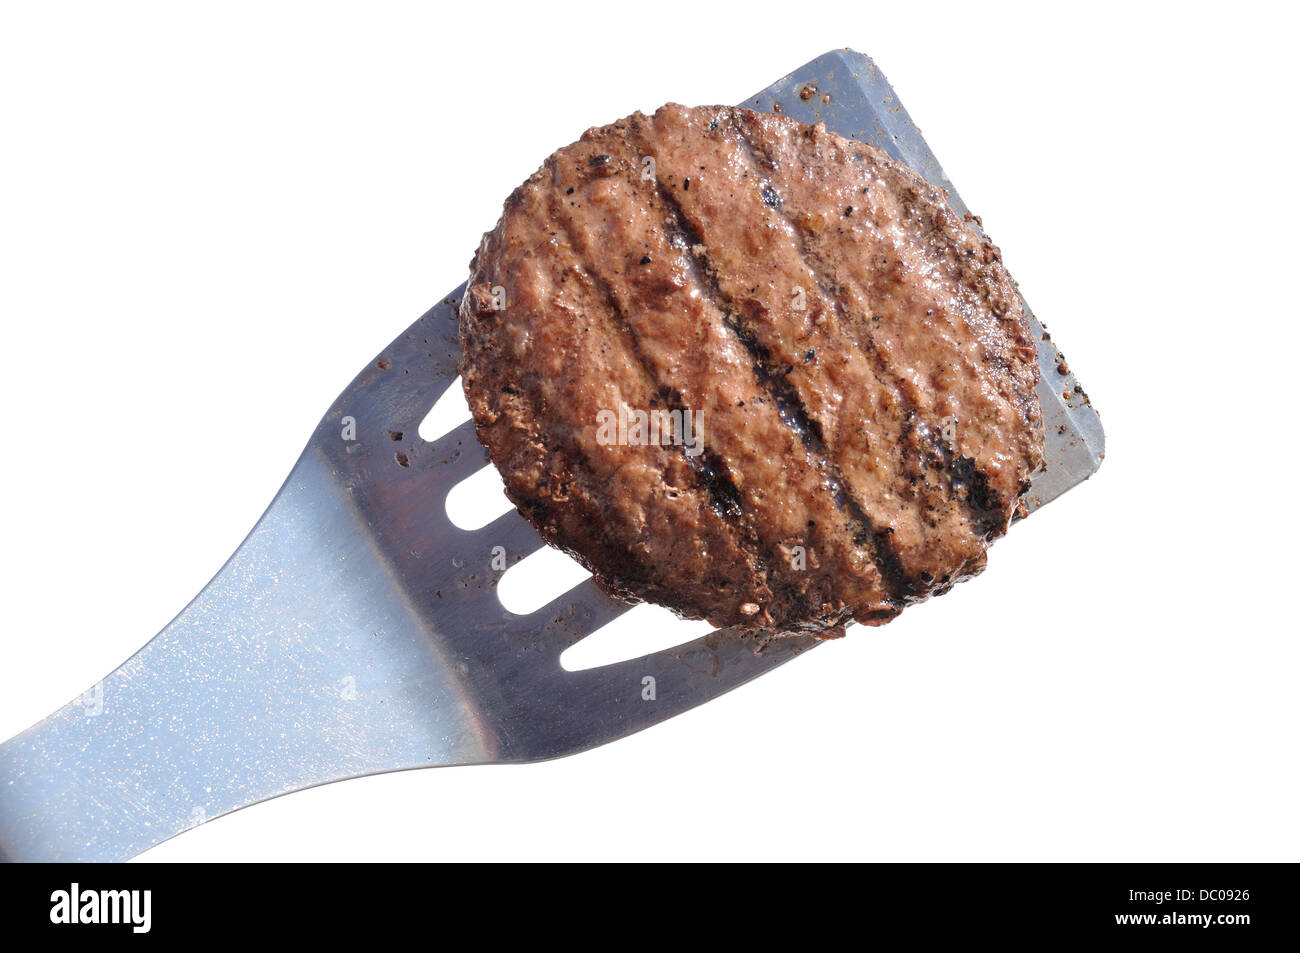 Grilled Hamburger Patty on a Spatula Isolated on White Stock Photo